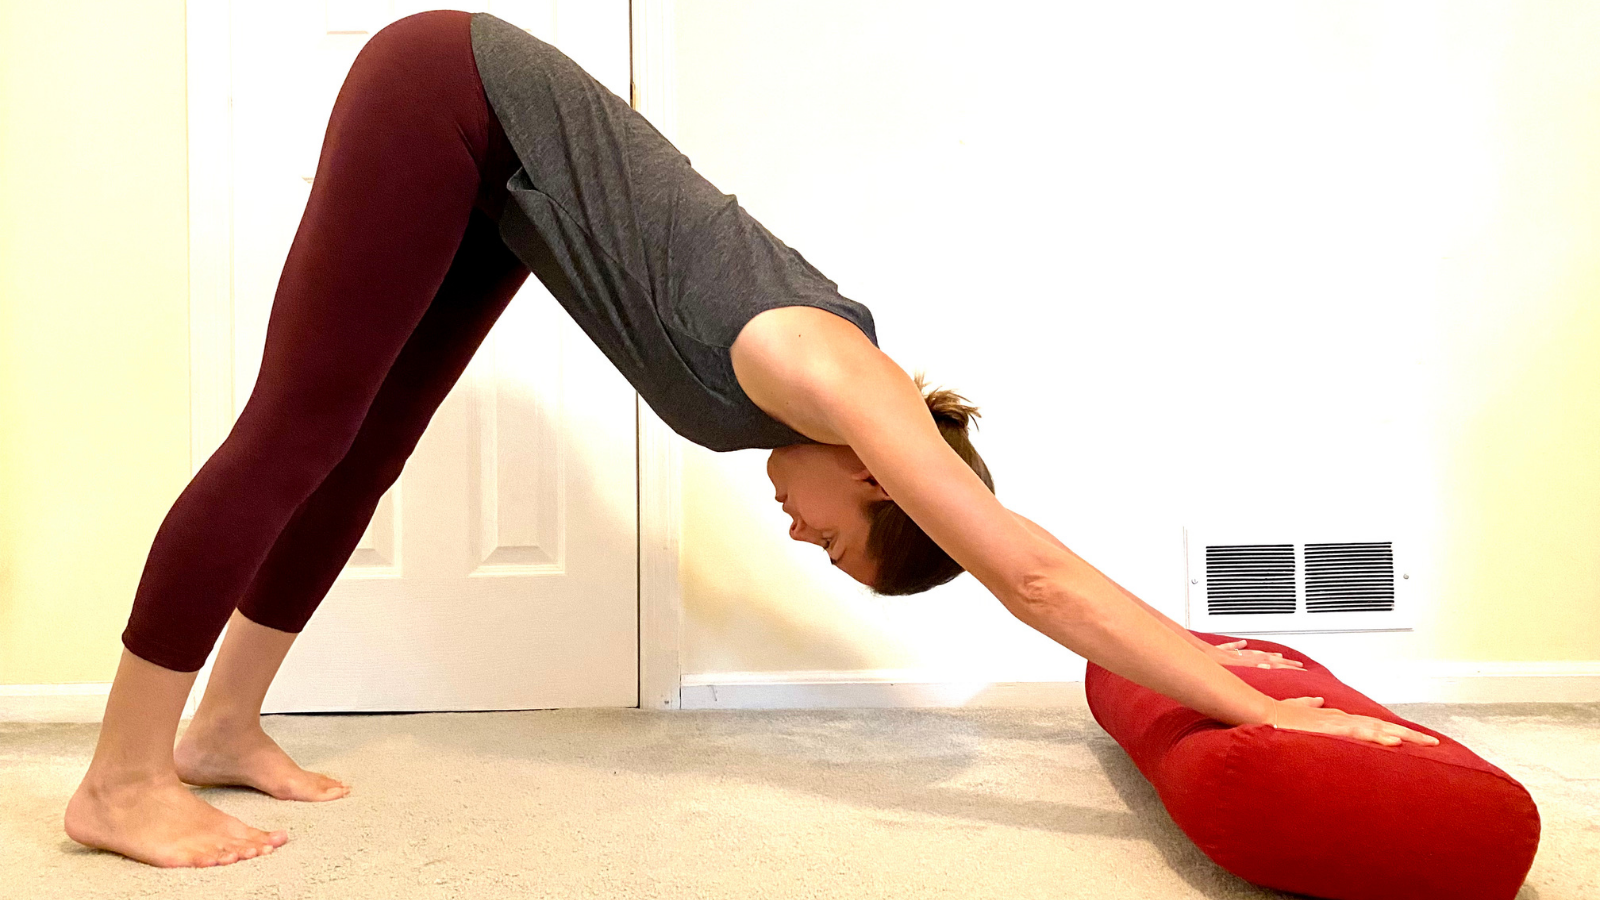 Variation of Down Dog (Adho Mukha Svanasana) adding a bolster under the hands to create more comfort and space